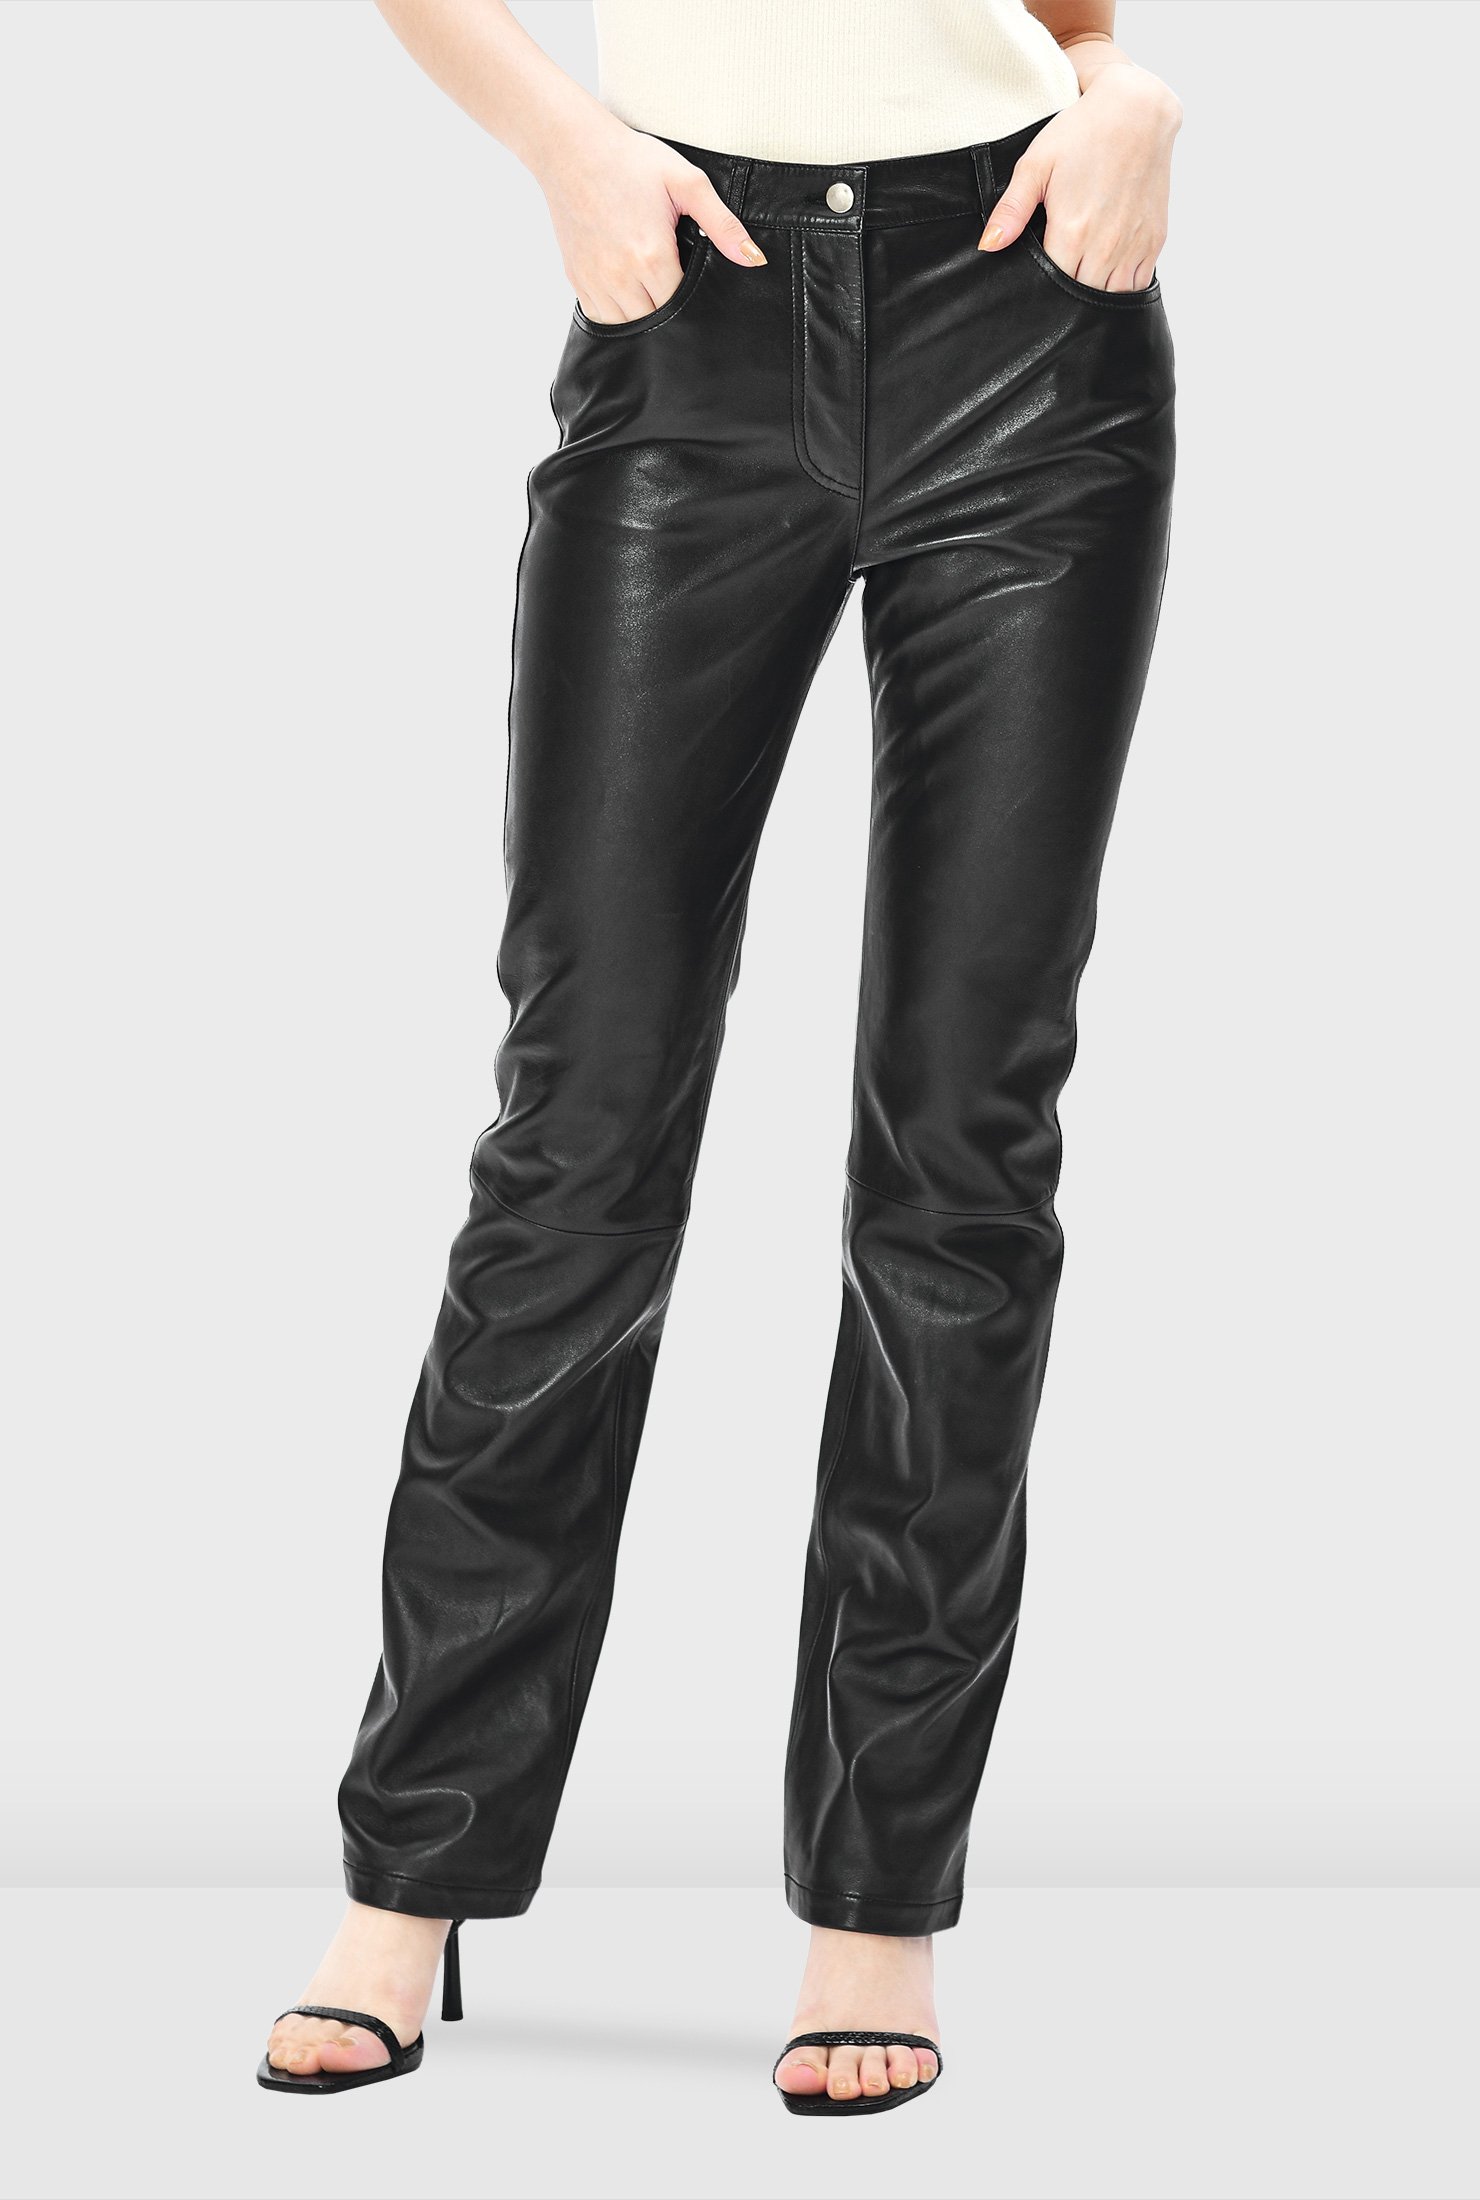 Genuine Leather Pants for Women, Ankle Length, Sheepskin Pants